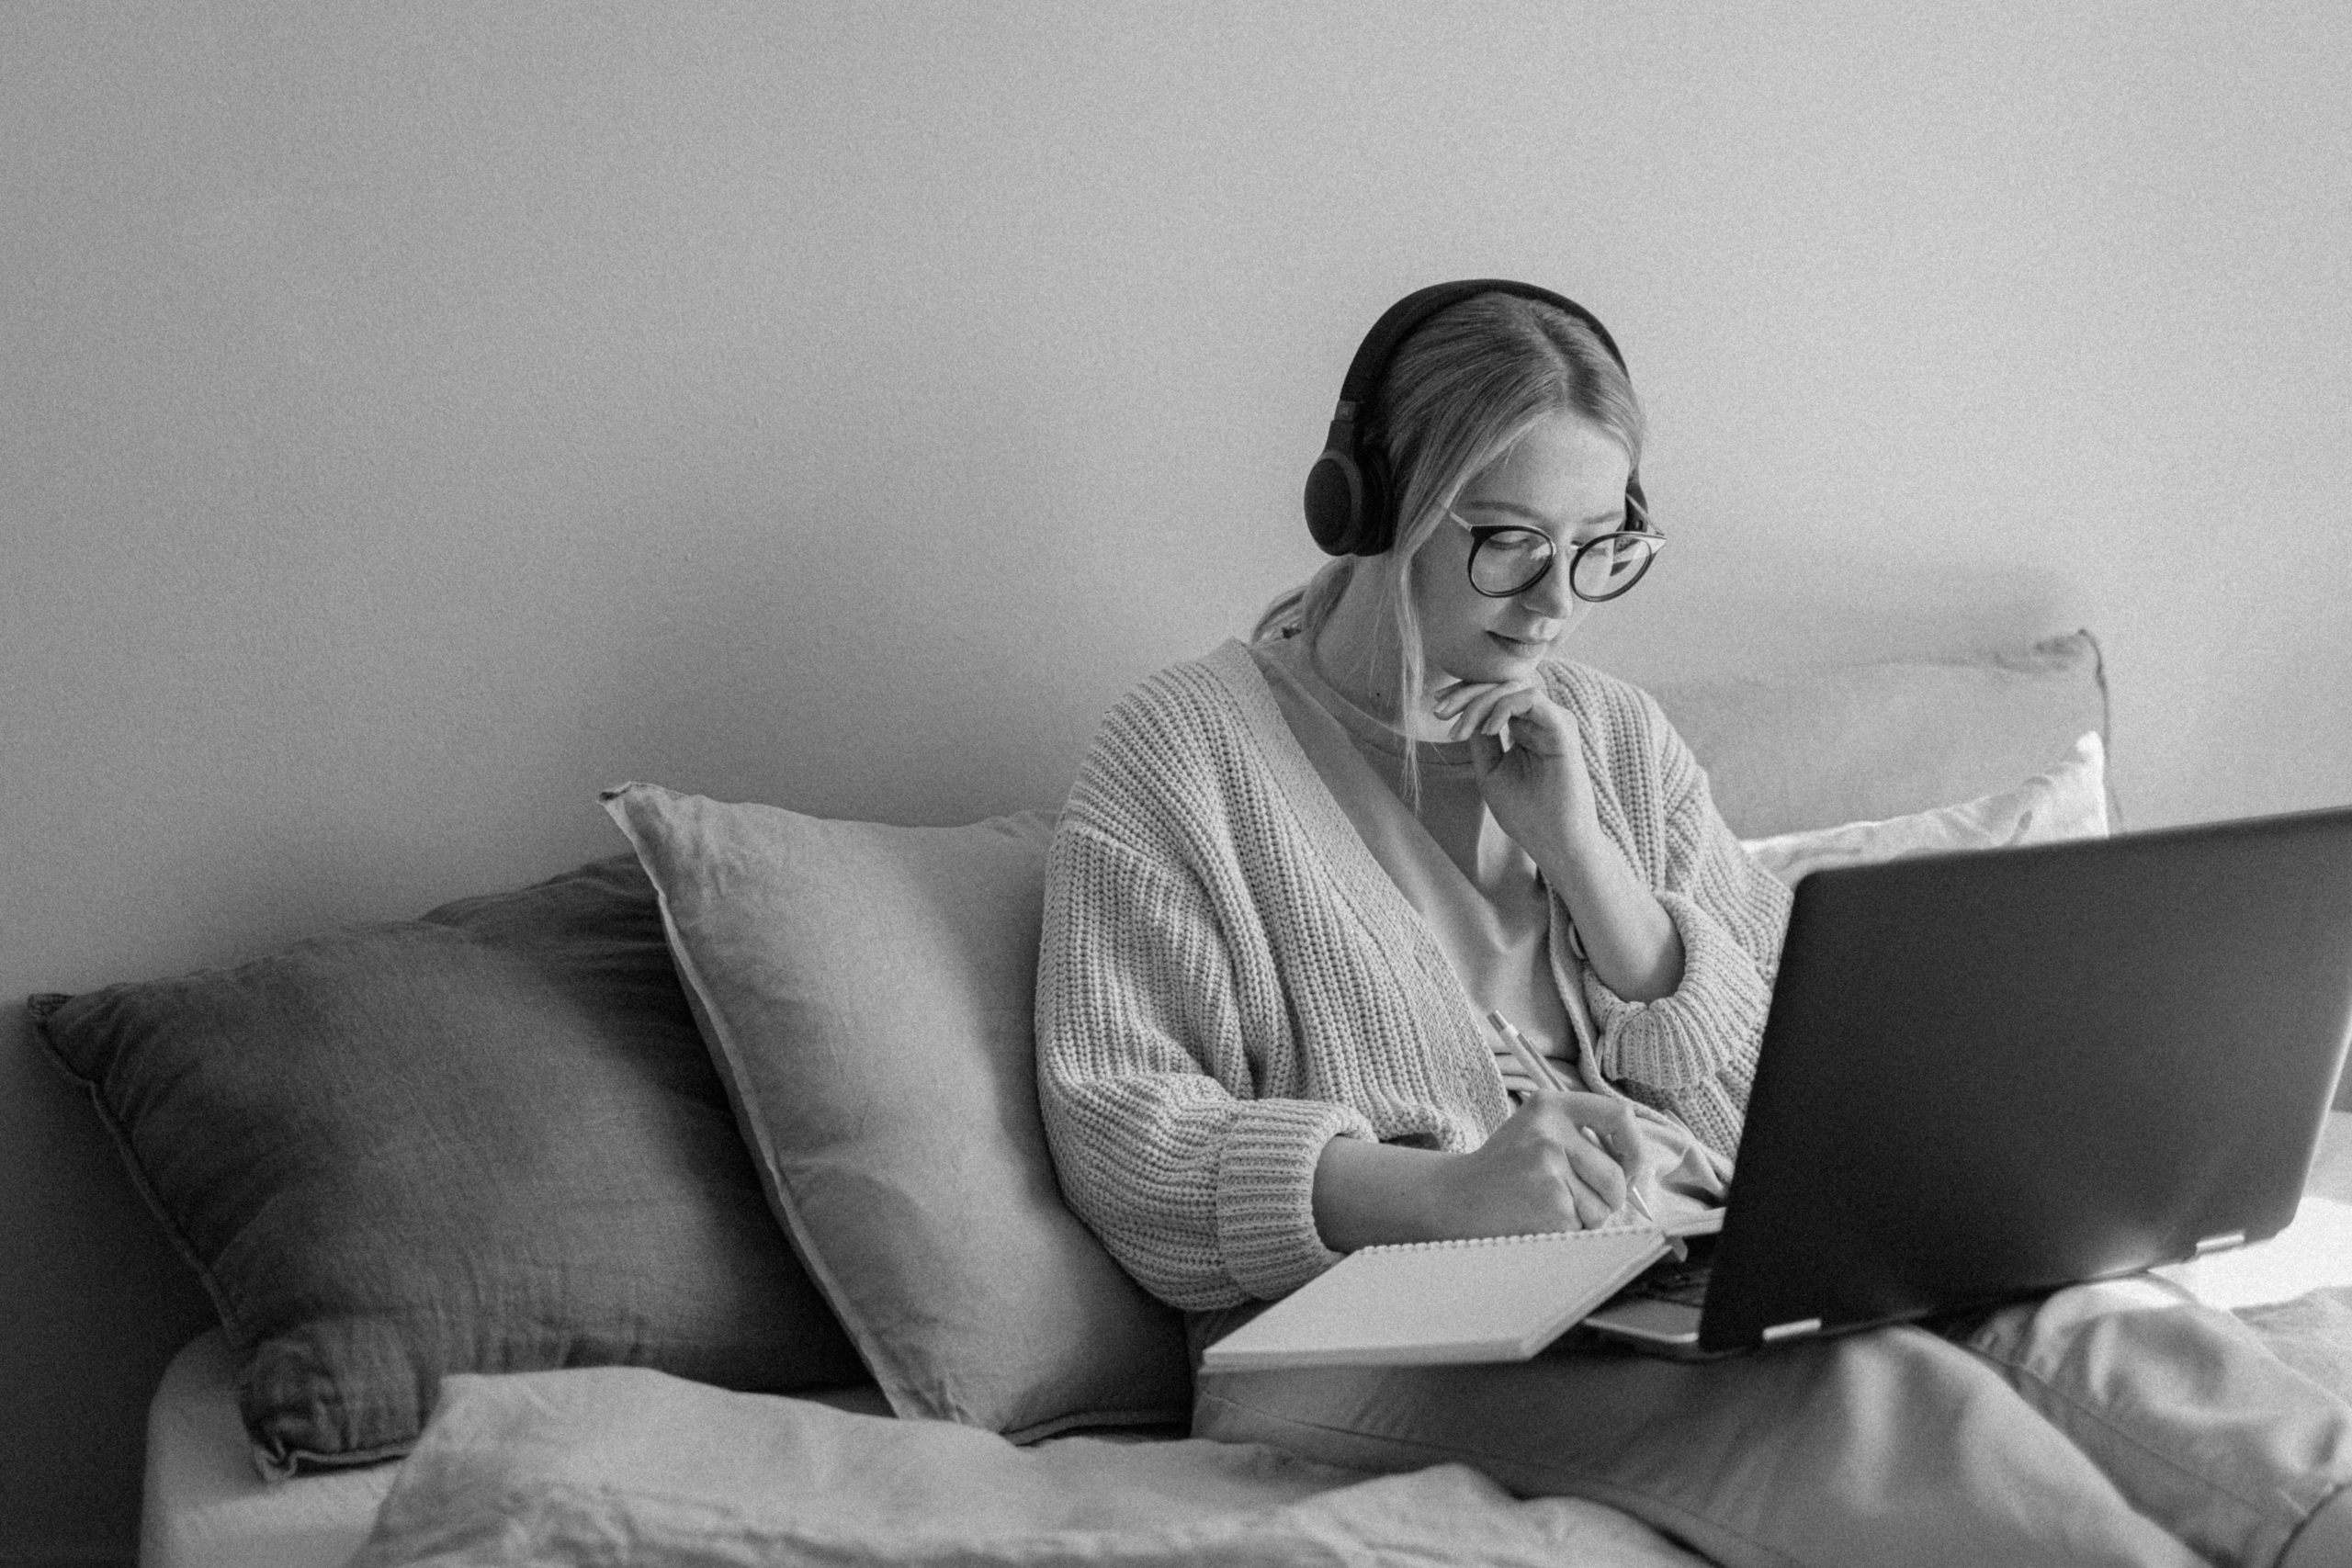 Young woman sitting on her couch, wearing headphone and working on her laptop.